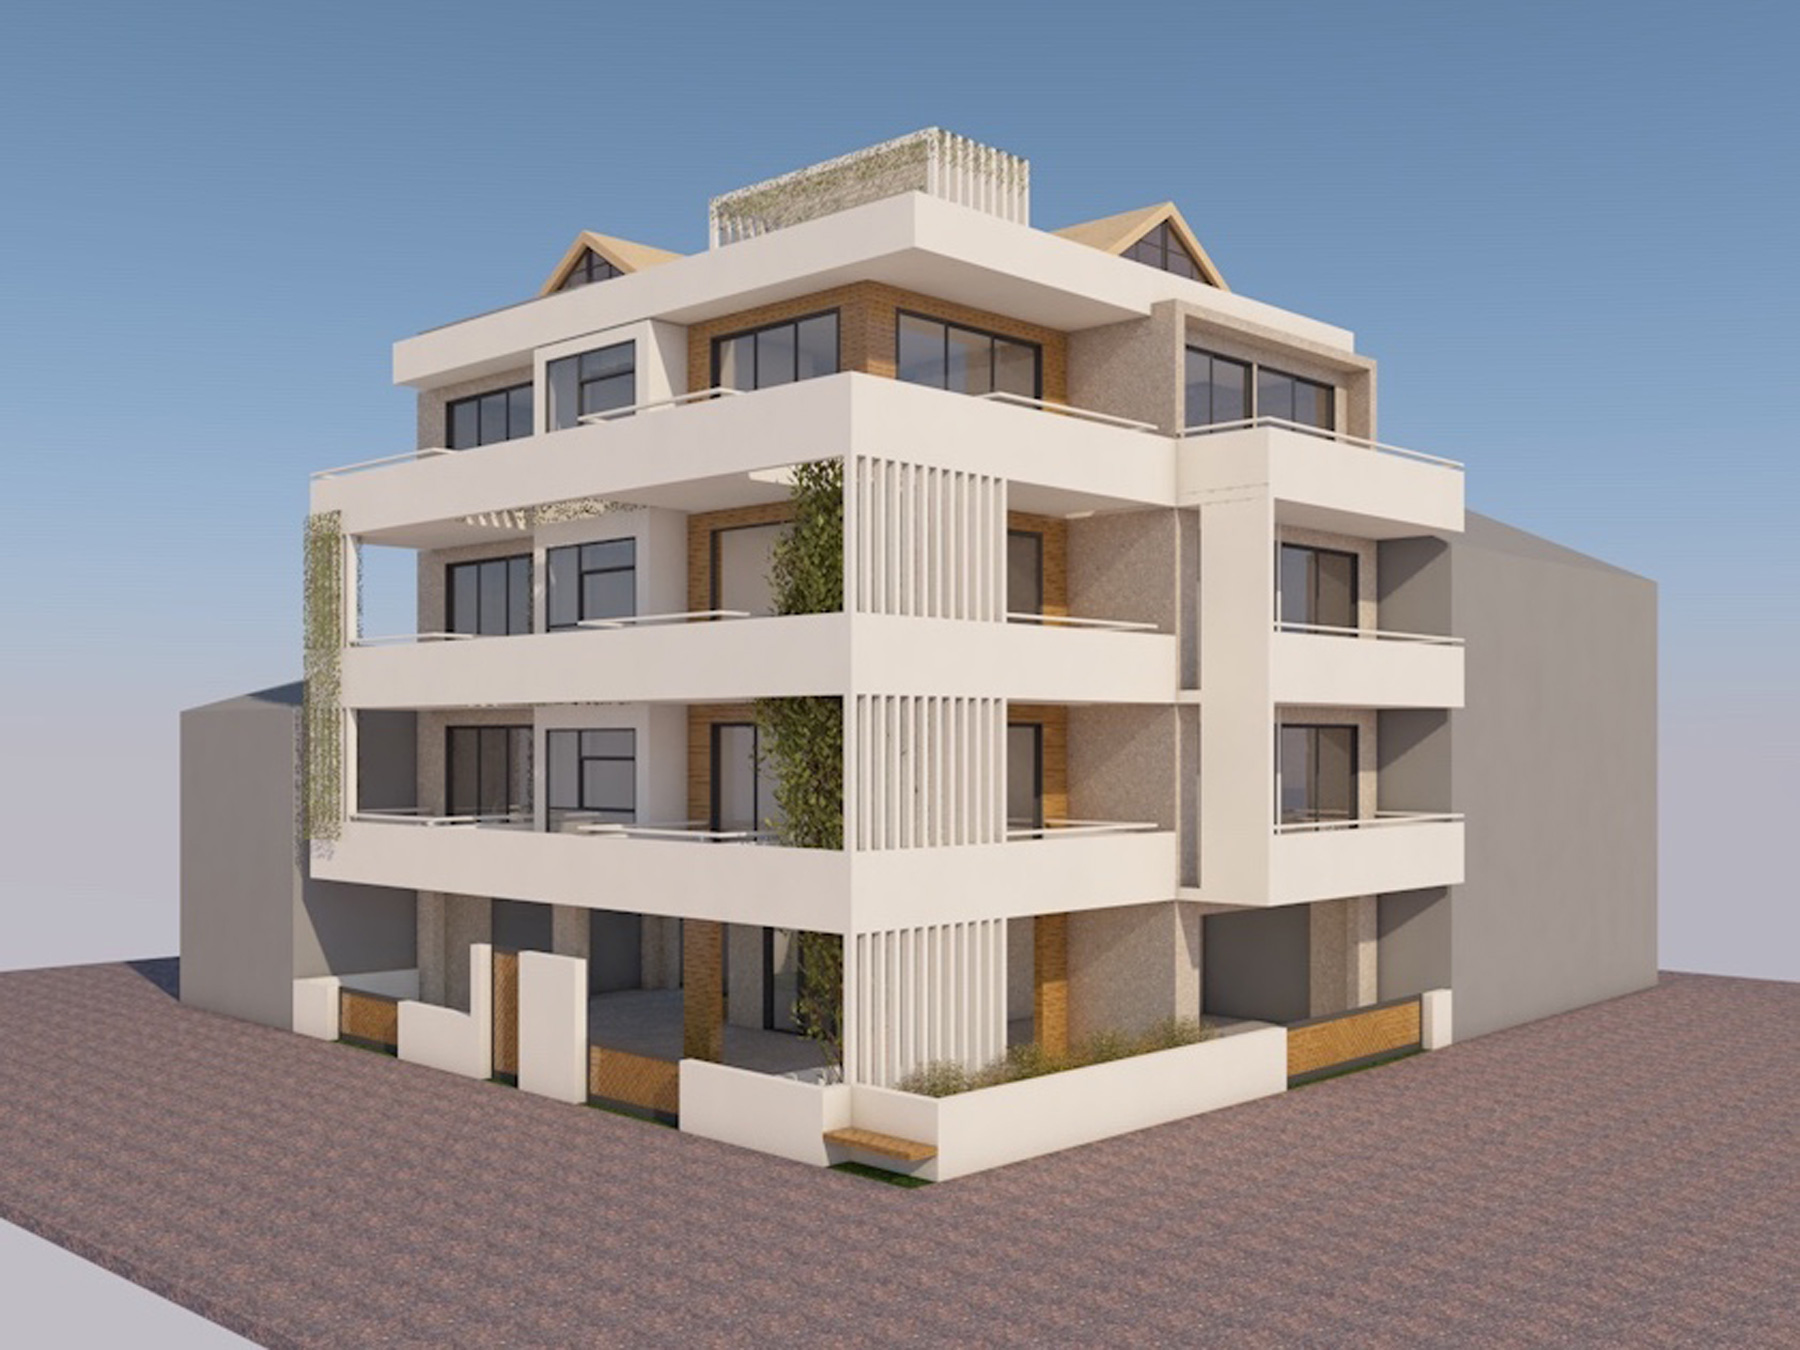 For sale, under construction, two-room apartment, 41 sq.m. 1st floor with warehouse in Karavatia, Ioannina